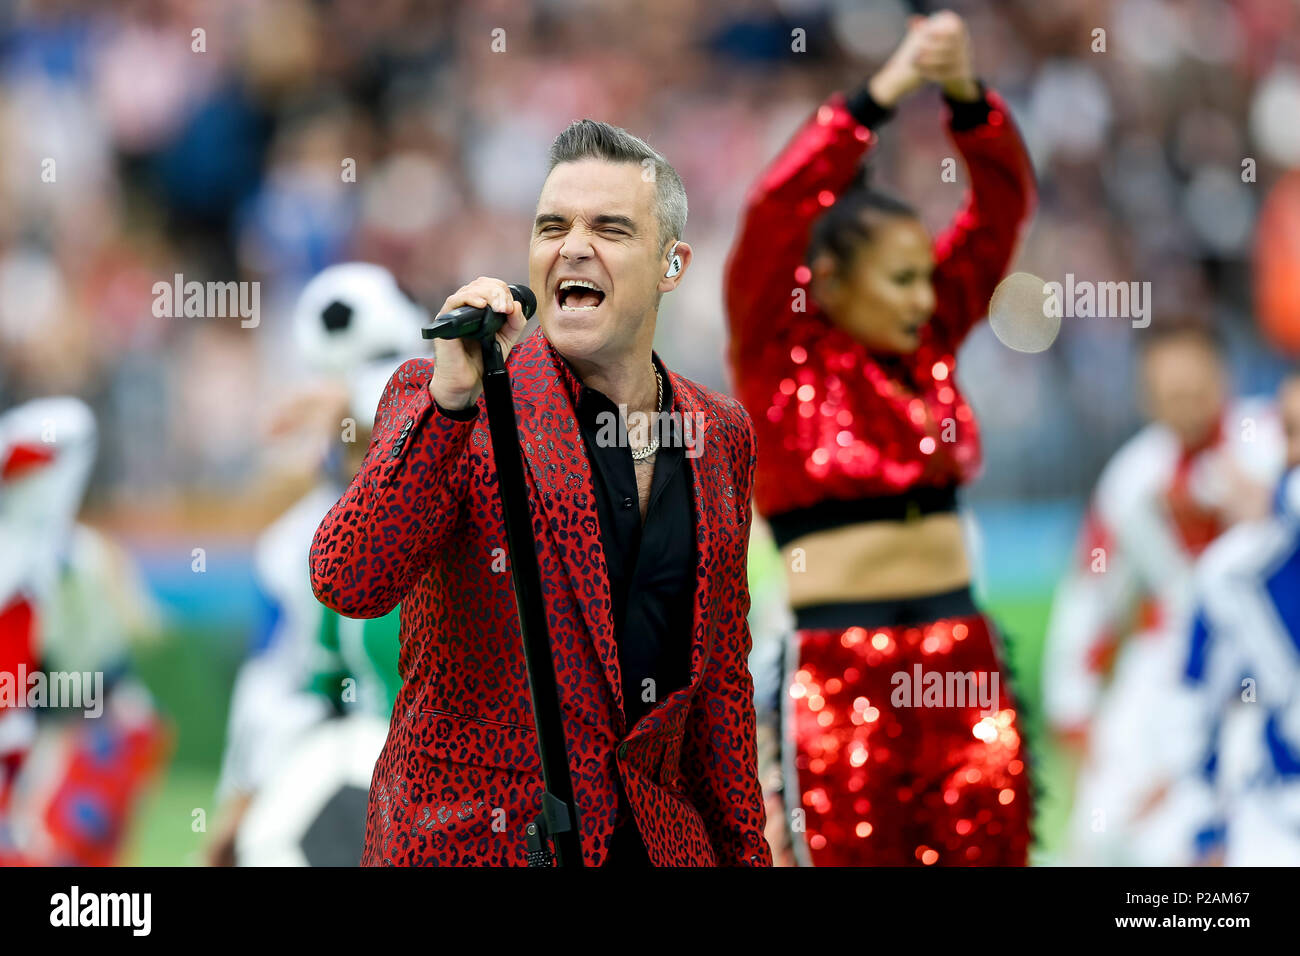 Moscow, Russia. 14th June 2018. Robbie Williams performs before the 2018 FIFA World Cup Group A match between Russia and Saudi Arabia at Luzhniki Stadium on June 14th 2018 in Moscow, Russia. Credit: PHC Images/Alamy Live News Stock Photo